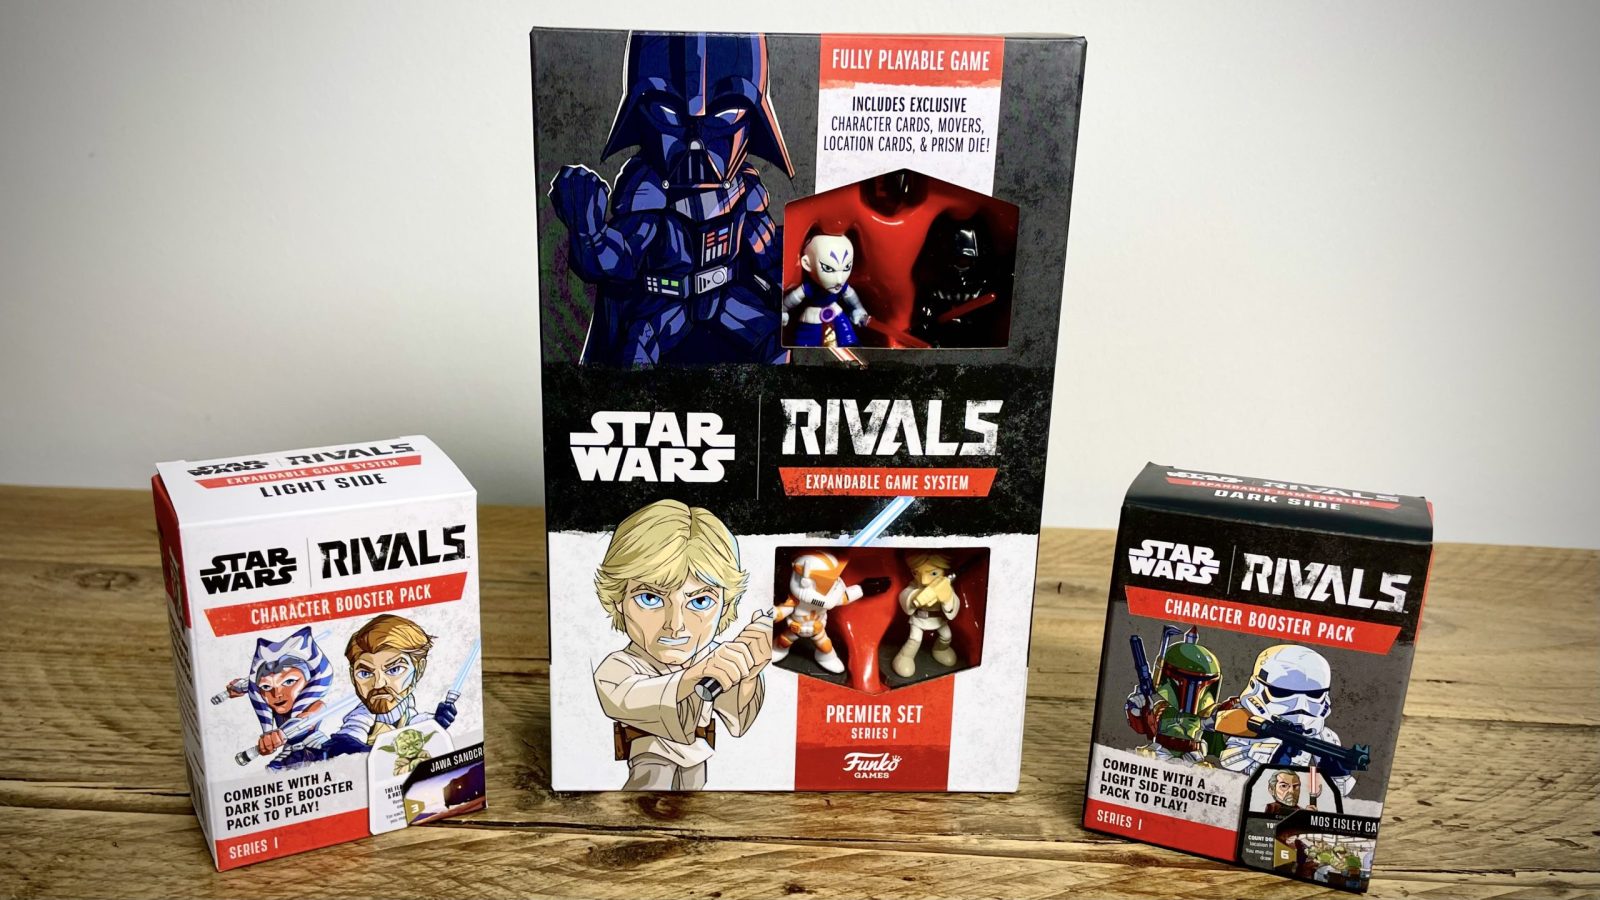 Star Wars Rivals Premium Set and Character Booster PacksStar Wars Rivals Premium Set and Character Booster Packs